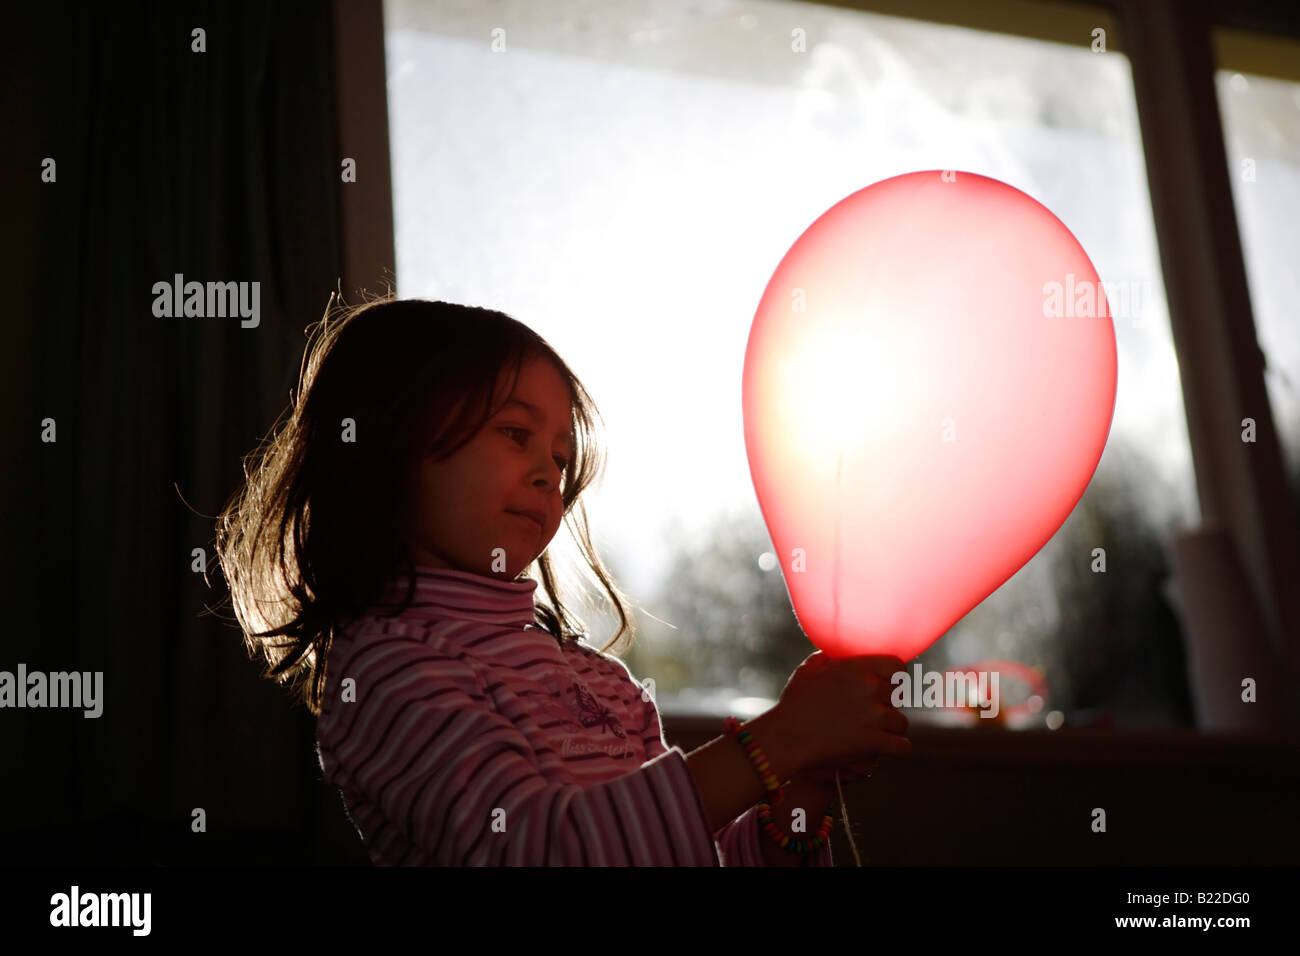 Girl aged four plays with red balloon lit up by afternoon sun streaming through a window Stock Photo